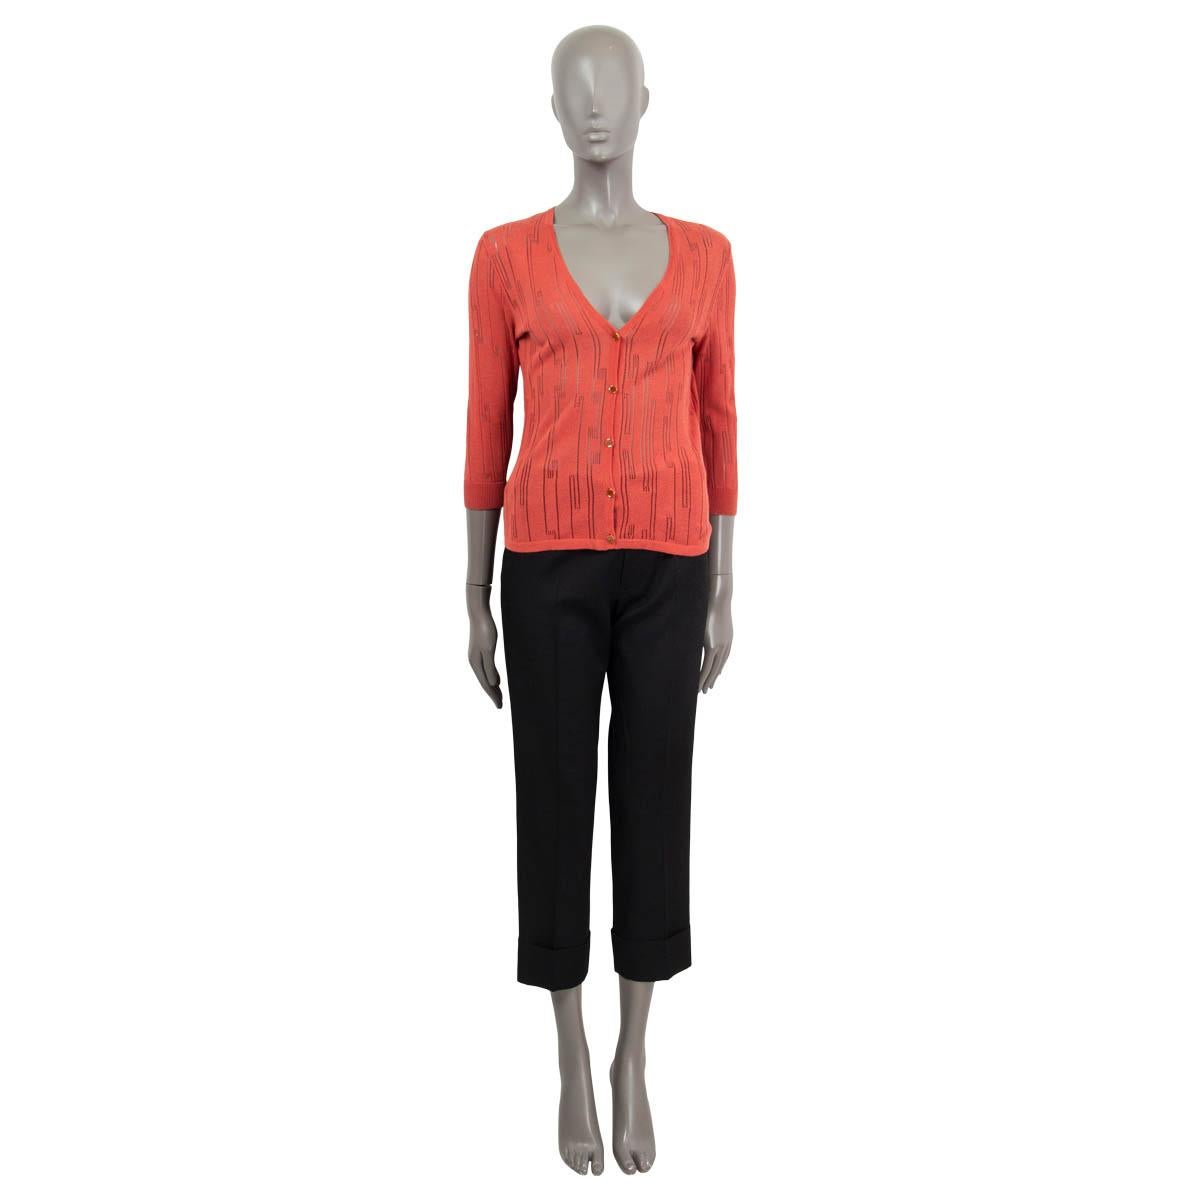 100% authentic Versace pointelle fine-knit cardigan in coral viscose (63%) and cotton (37%). Features a gold-ton medusa buttons and a v-neck. Has been worn and is in excellent condition.

Measurements
Tag Size	40
Size	S
Shoulder Width	40cm